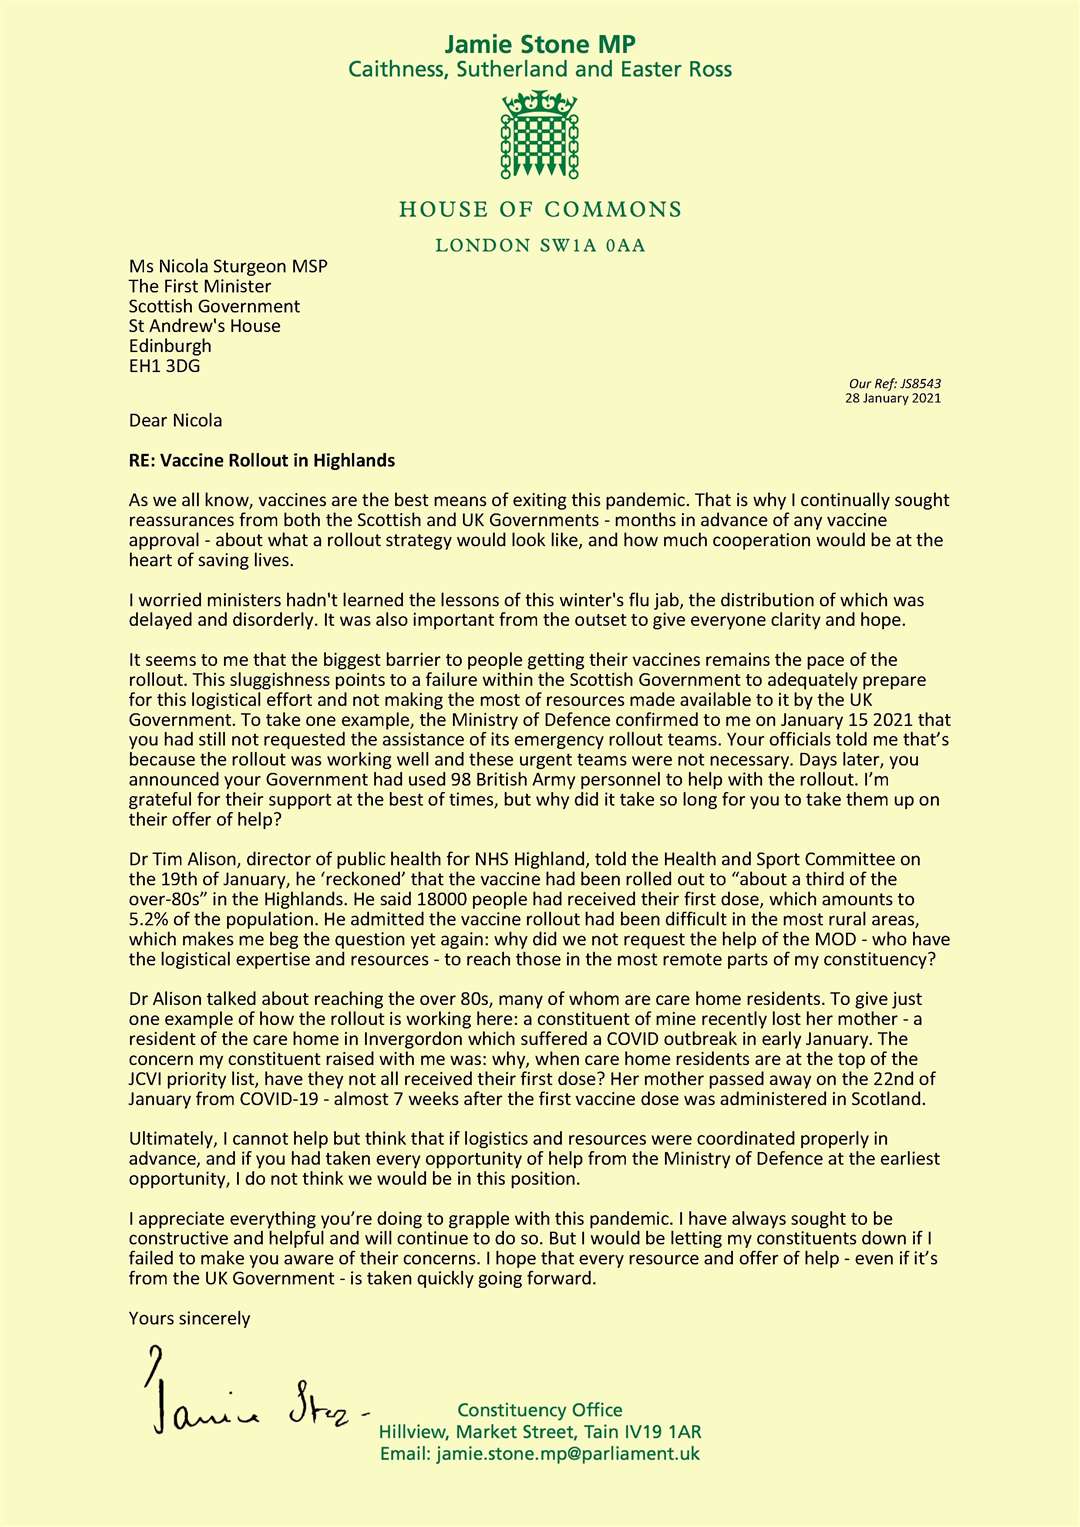 MP Jamie Stone's letter to First Minister Nicola Sturgeon on the rollout of vaccines in the Highlands.